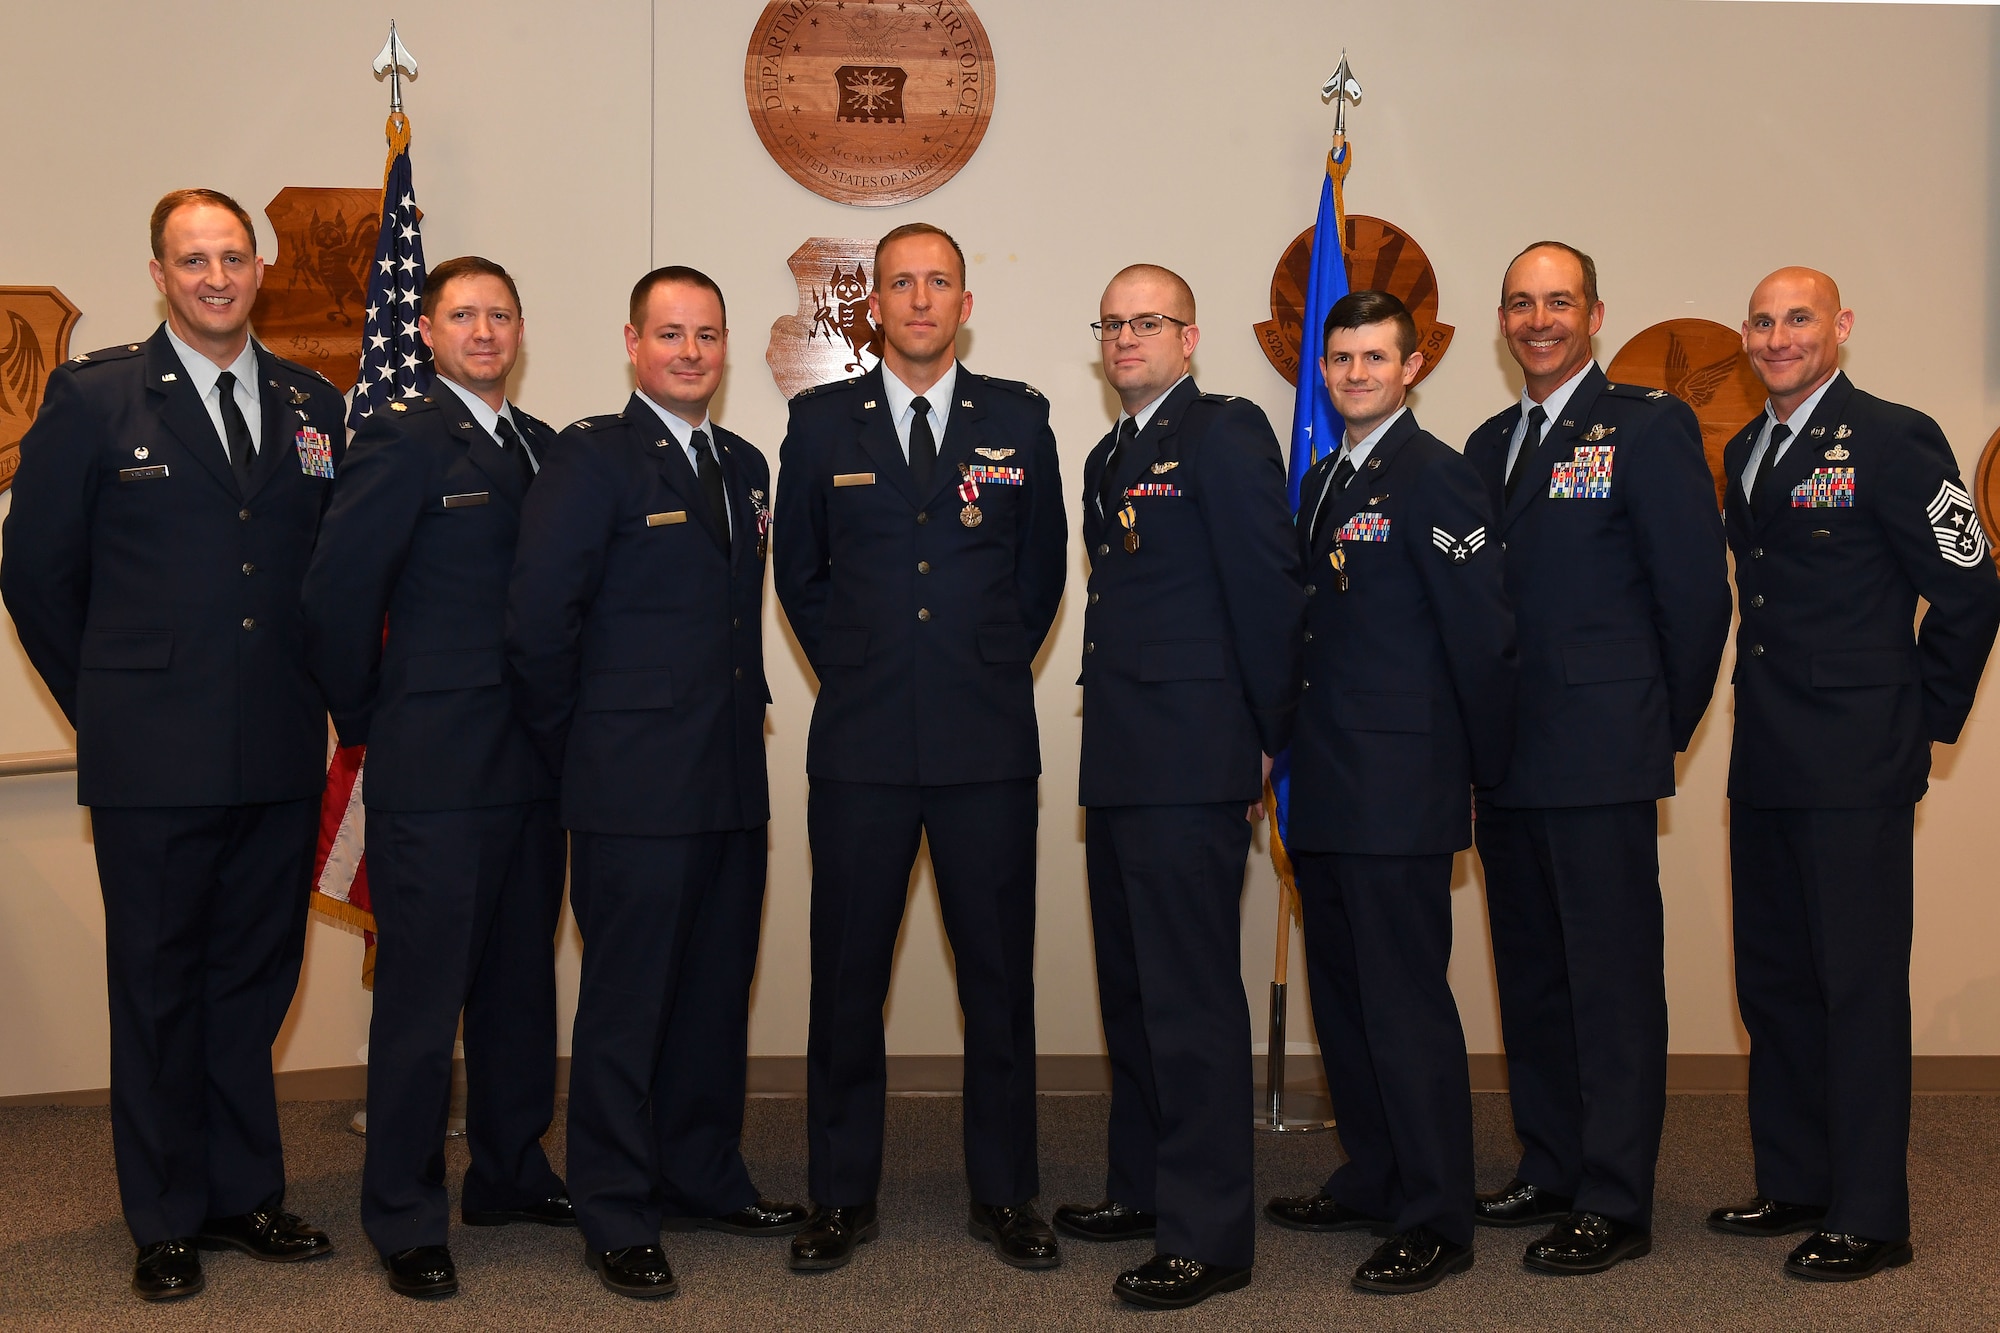 This award ceremony recognized the direct impact Remotely Piloted Aircraft aircrews have on the battlefield and distinguished those who performed extraordinarily in their capacities. (U.S. Air Force photo by Senior Airman James Thompson)